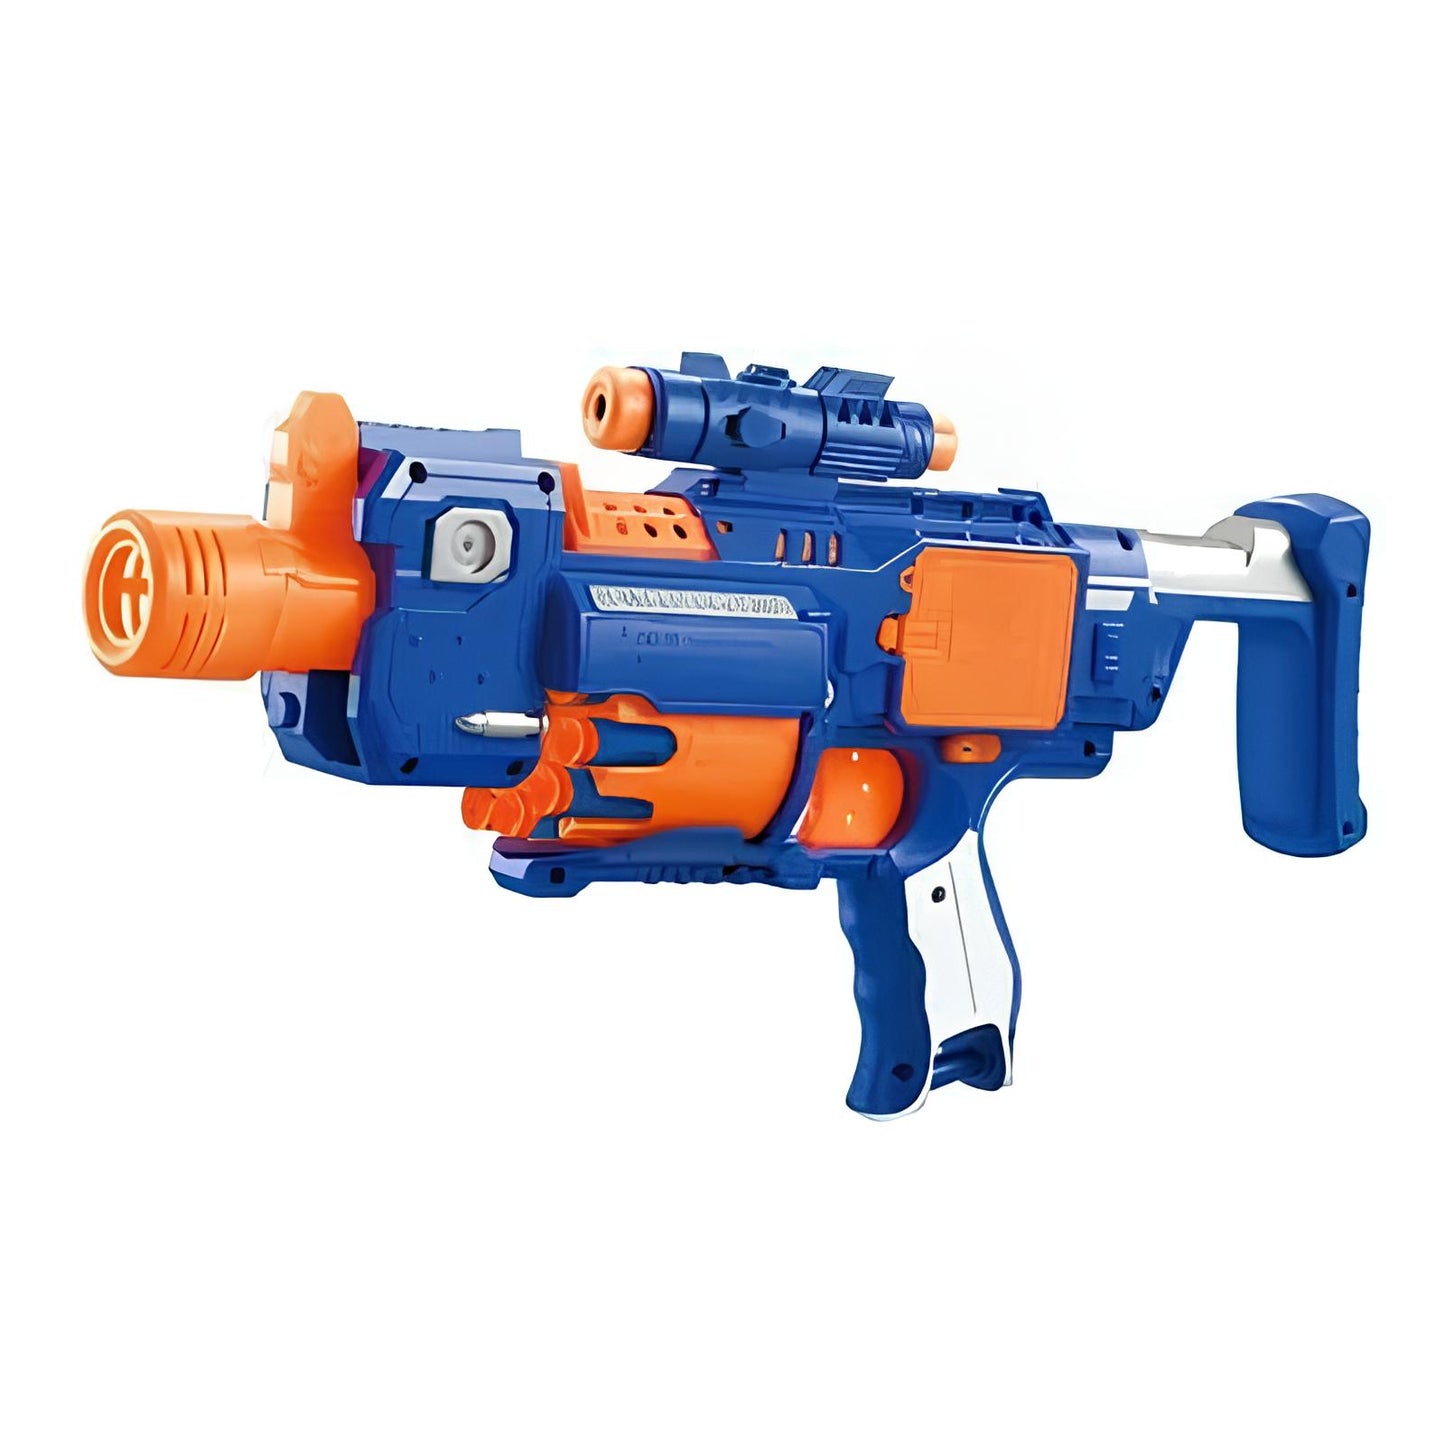 Automatic Soft Bullet Toy Gun | BLAST Super Electric Gun With Target